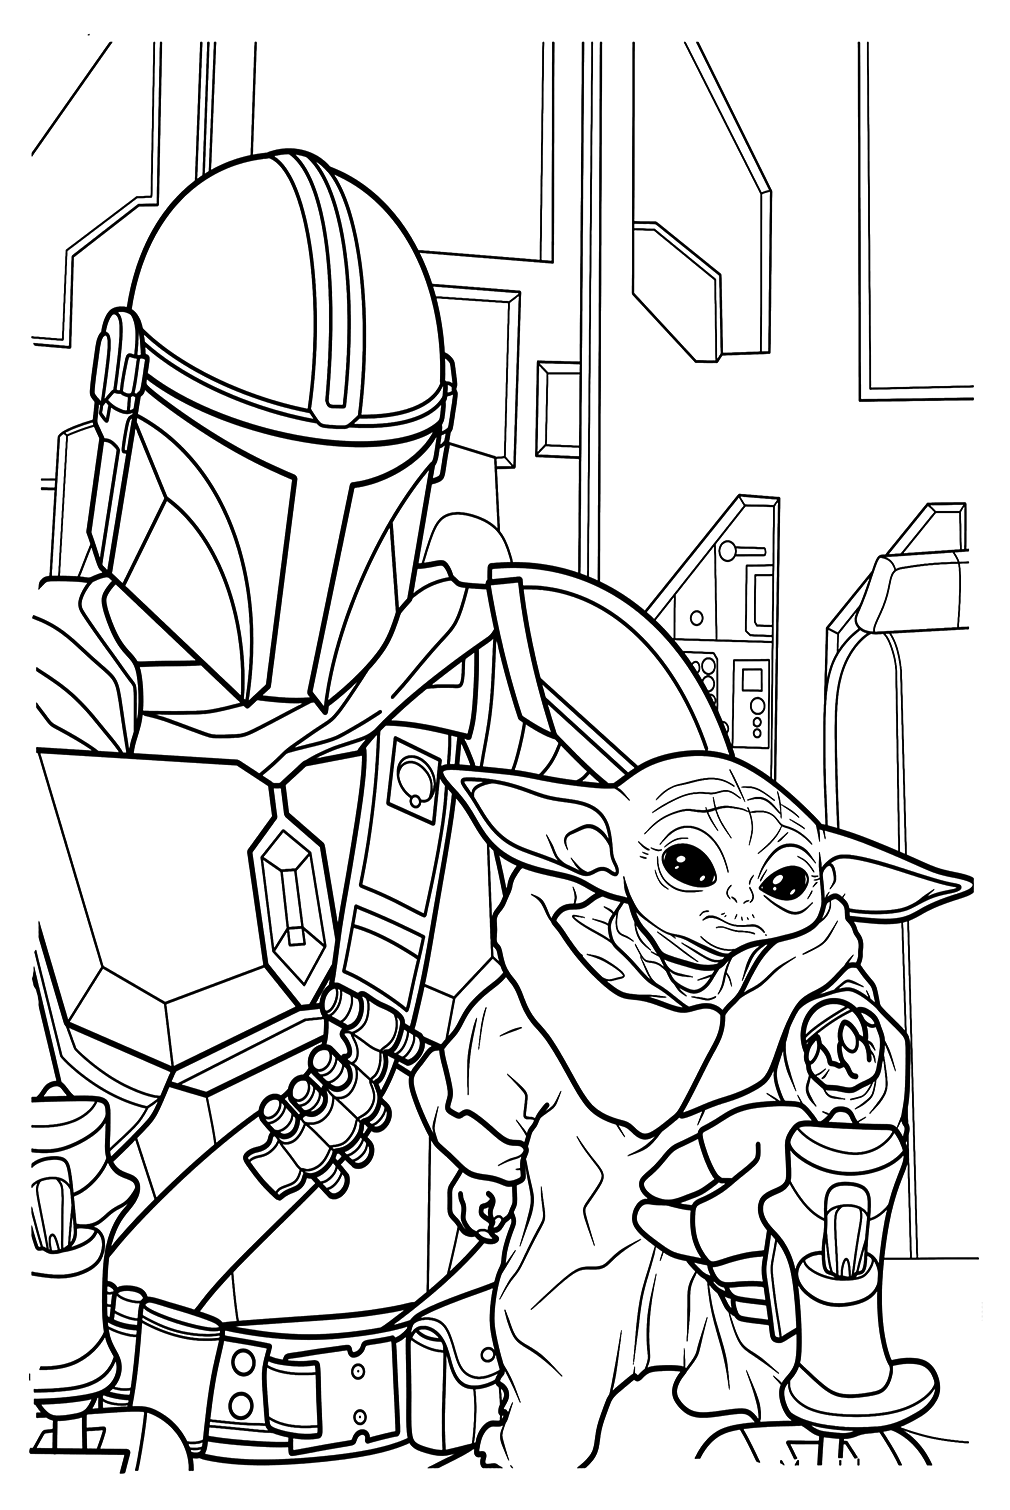 Baby Yoda And Din Djarin Coloring Page from Baby Yoda